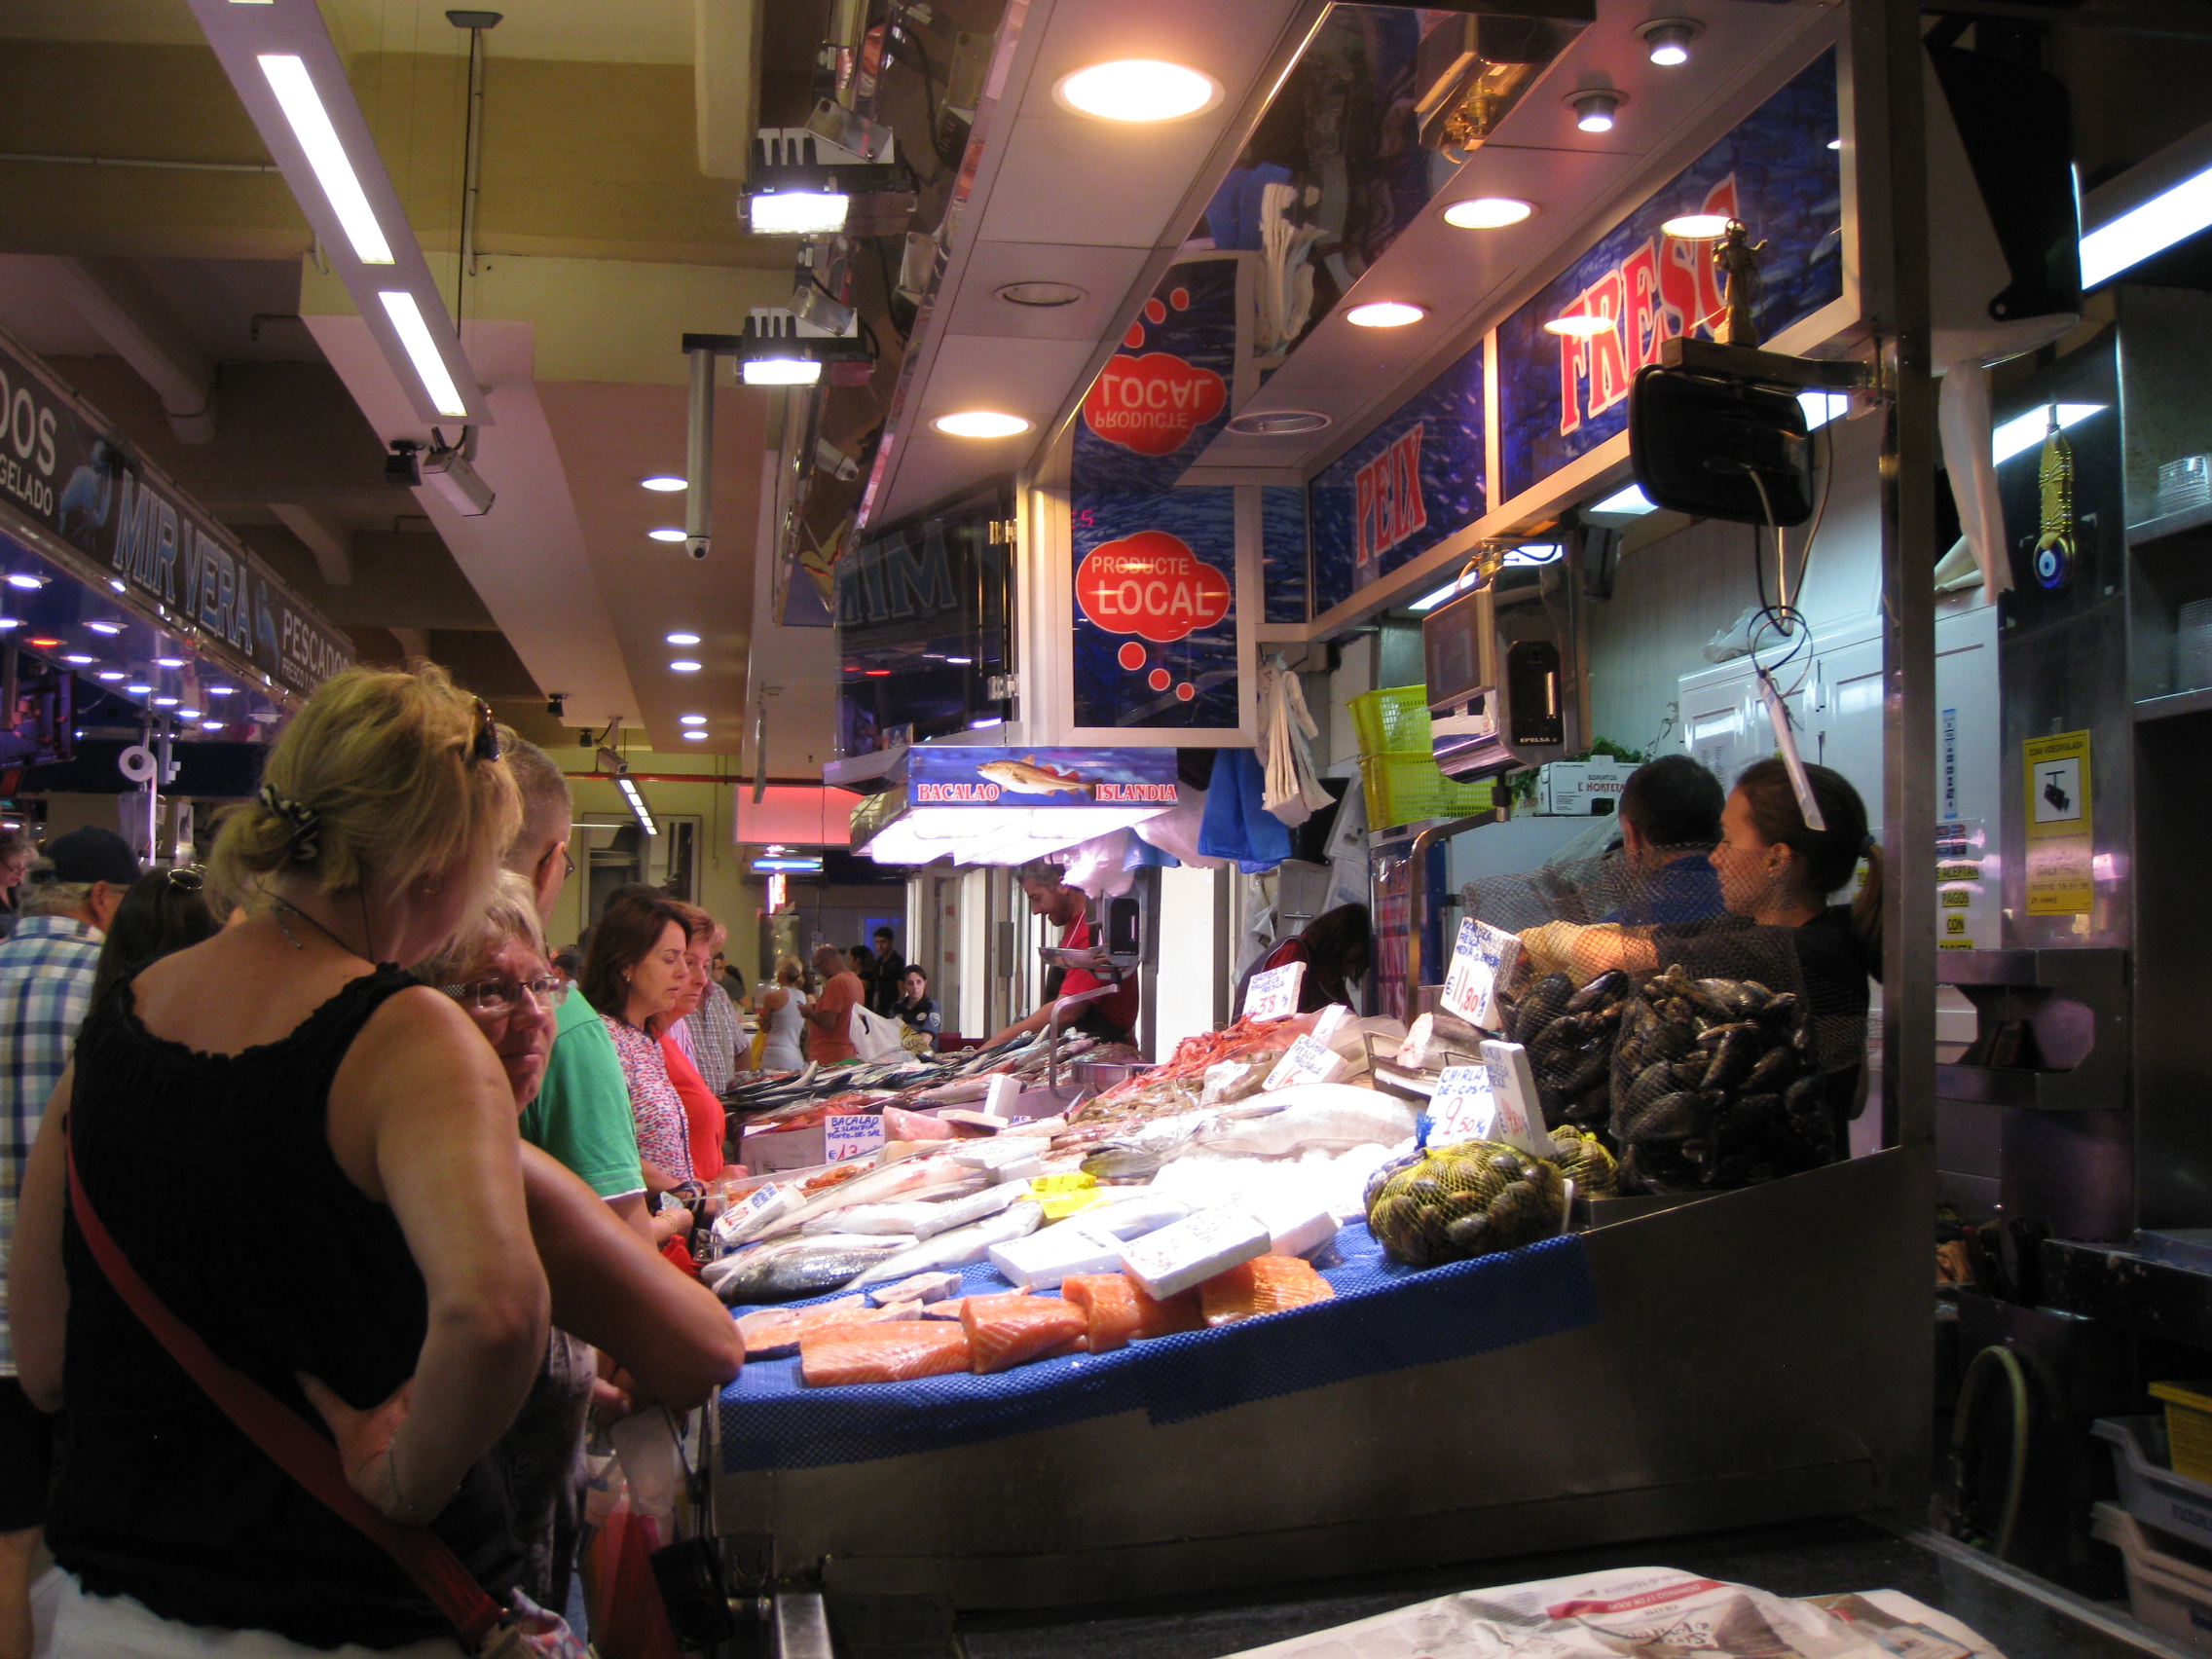 We visited a big market, look at all the fish!